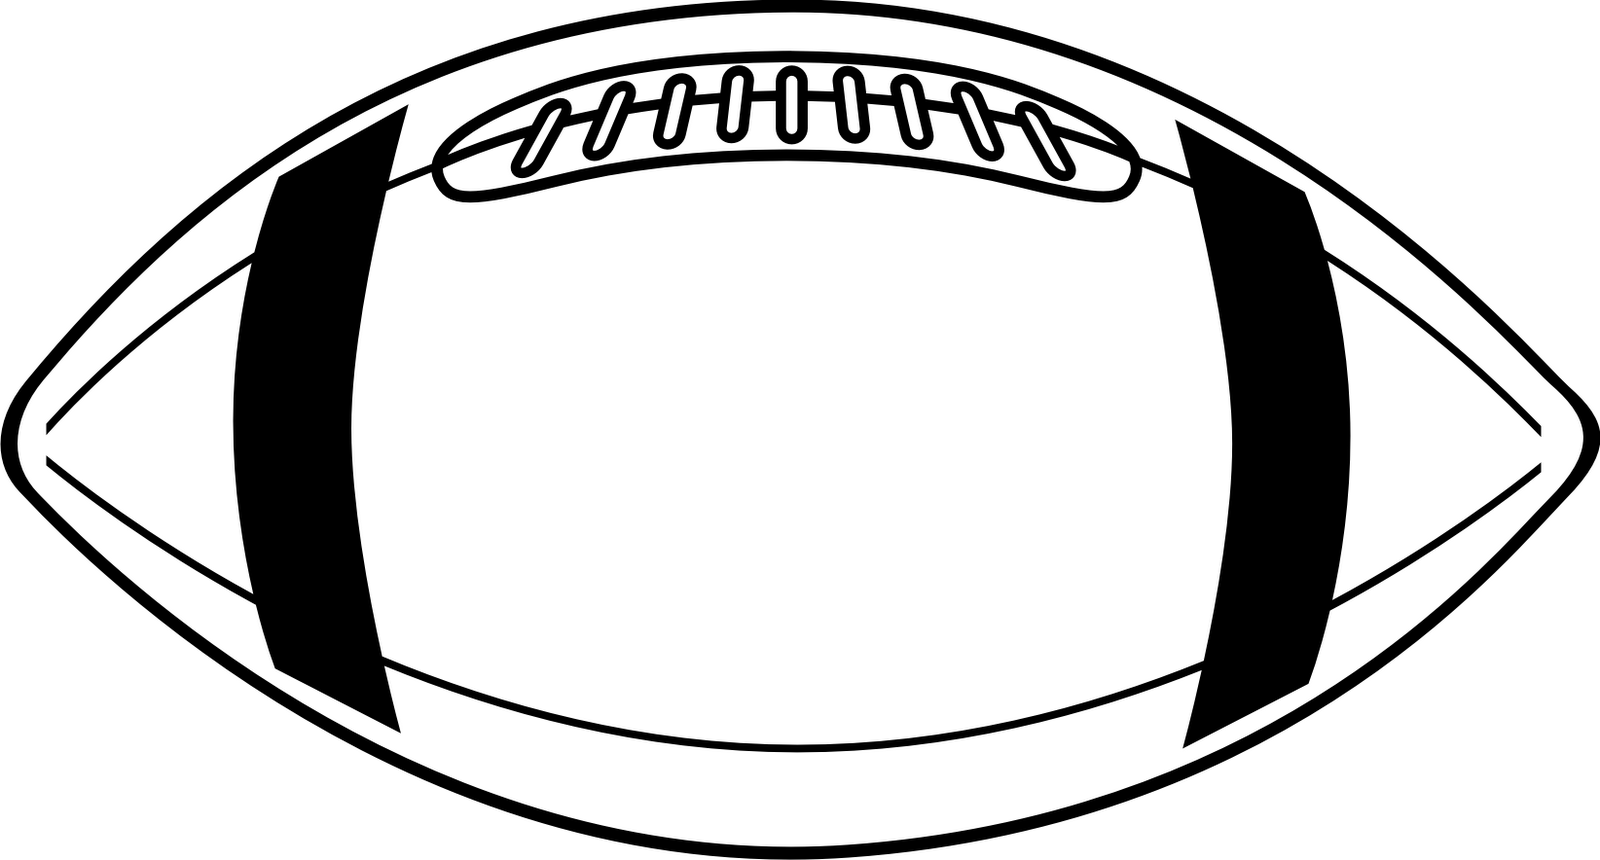 Clip Art Football Field Black And White Football Players Clipart Black